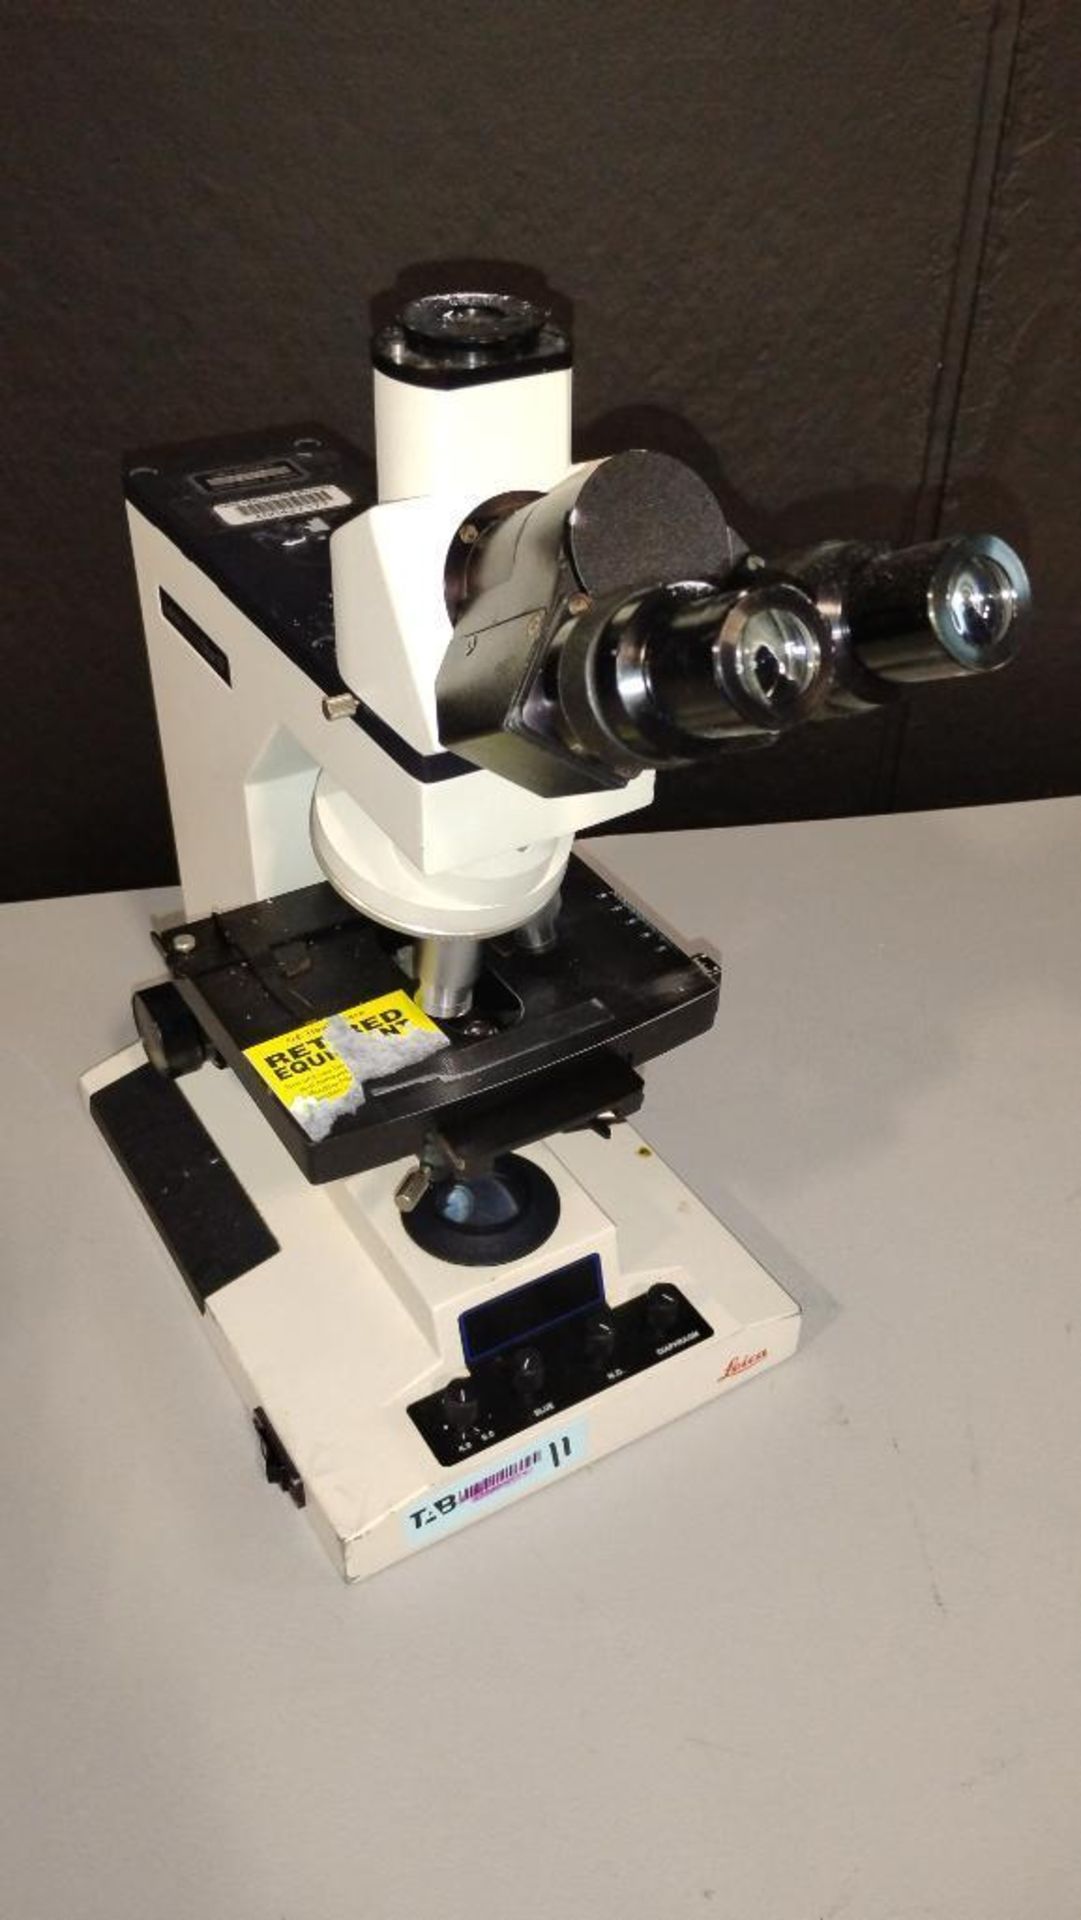 LEICA MICROSTAR IV LAB MICROSCOPE WITH 3 OBJECTIVES